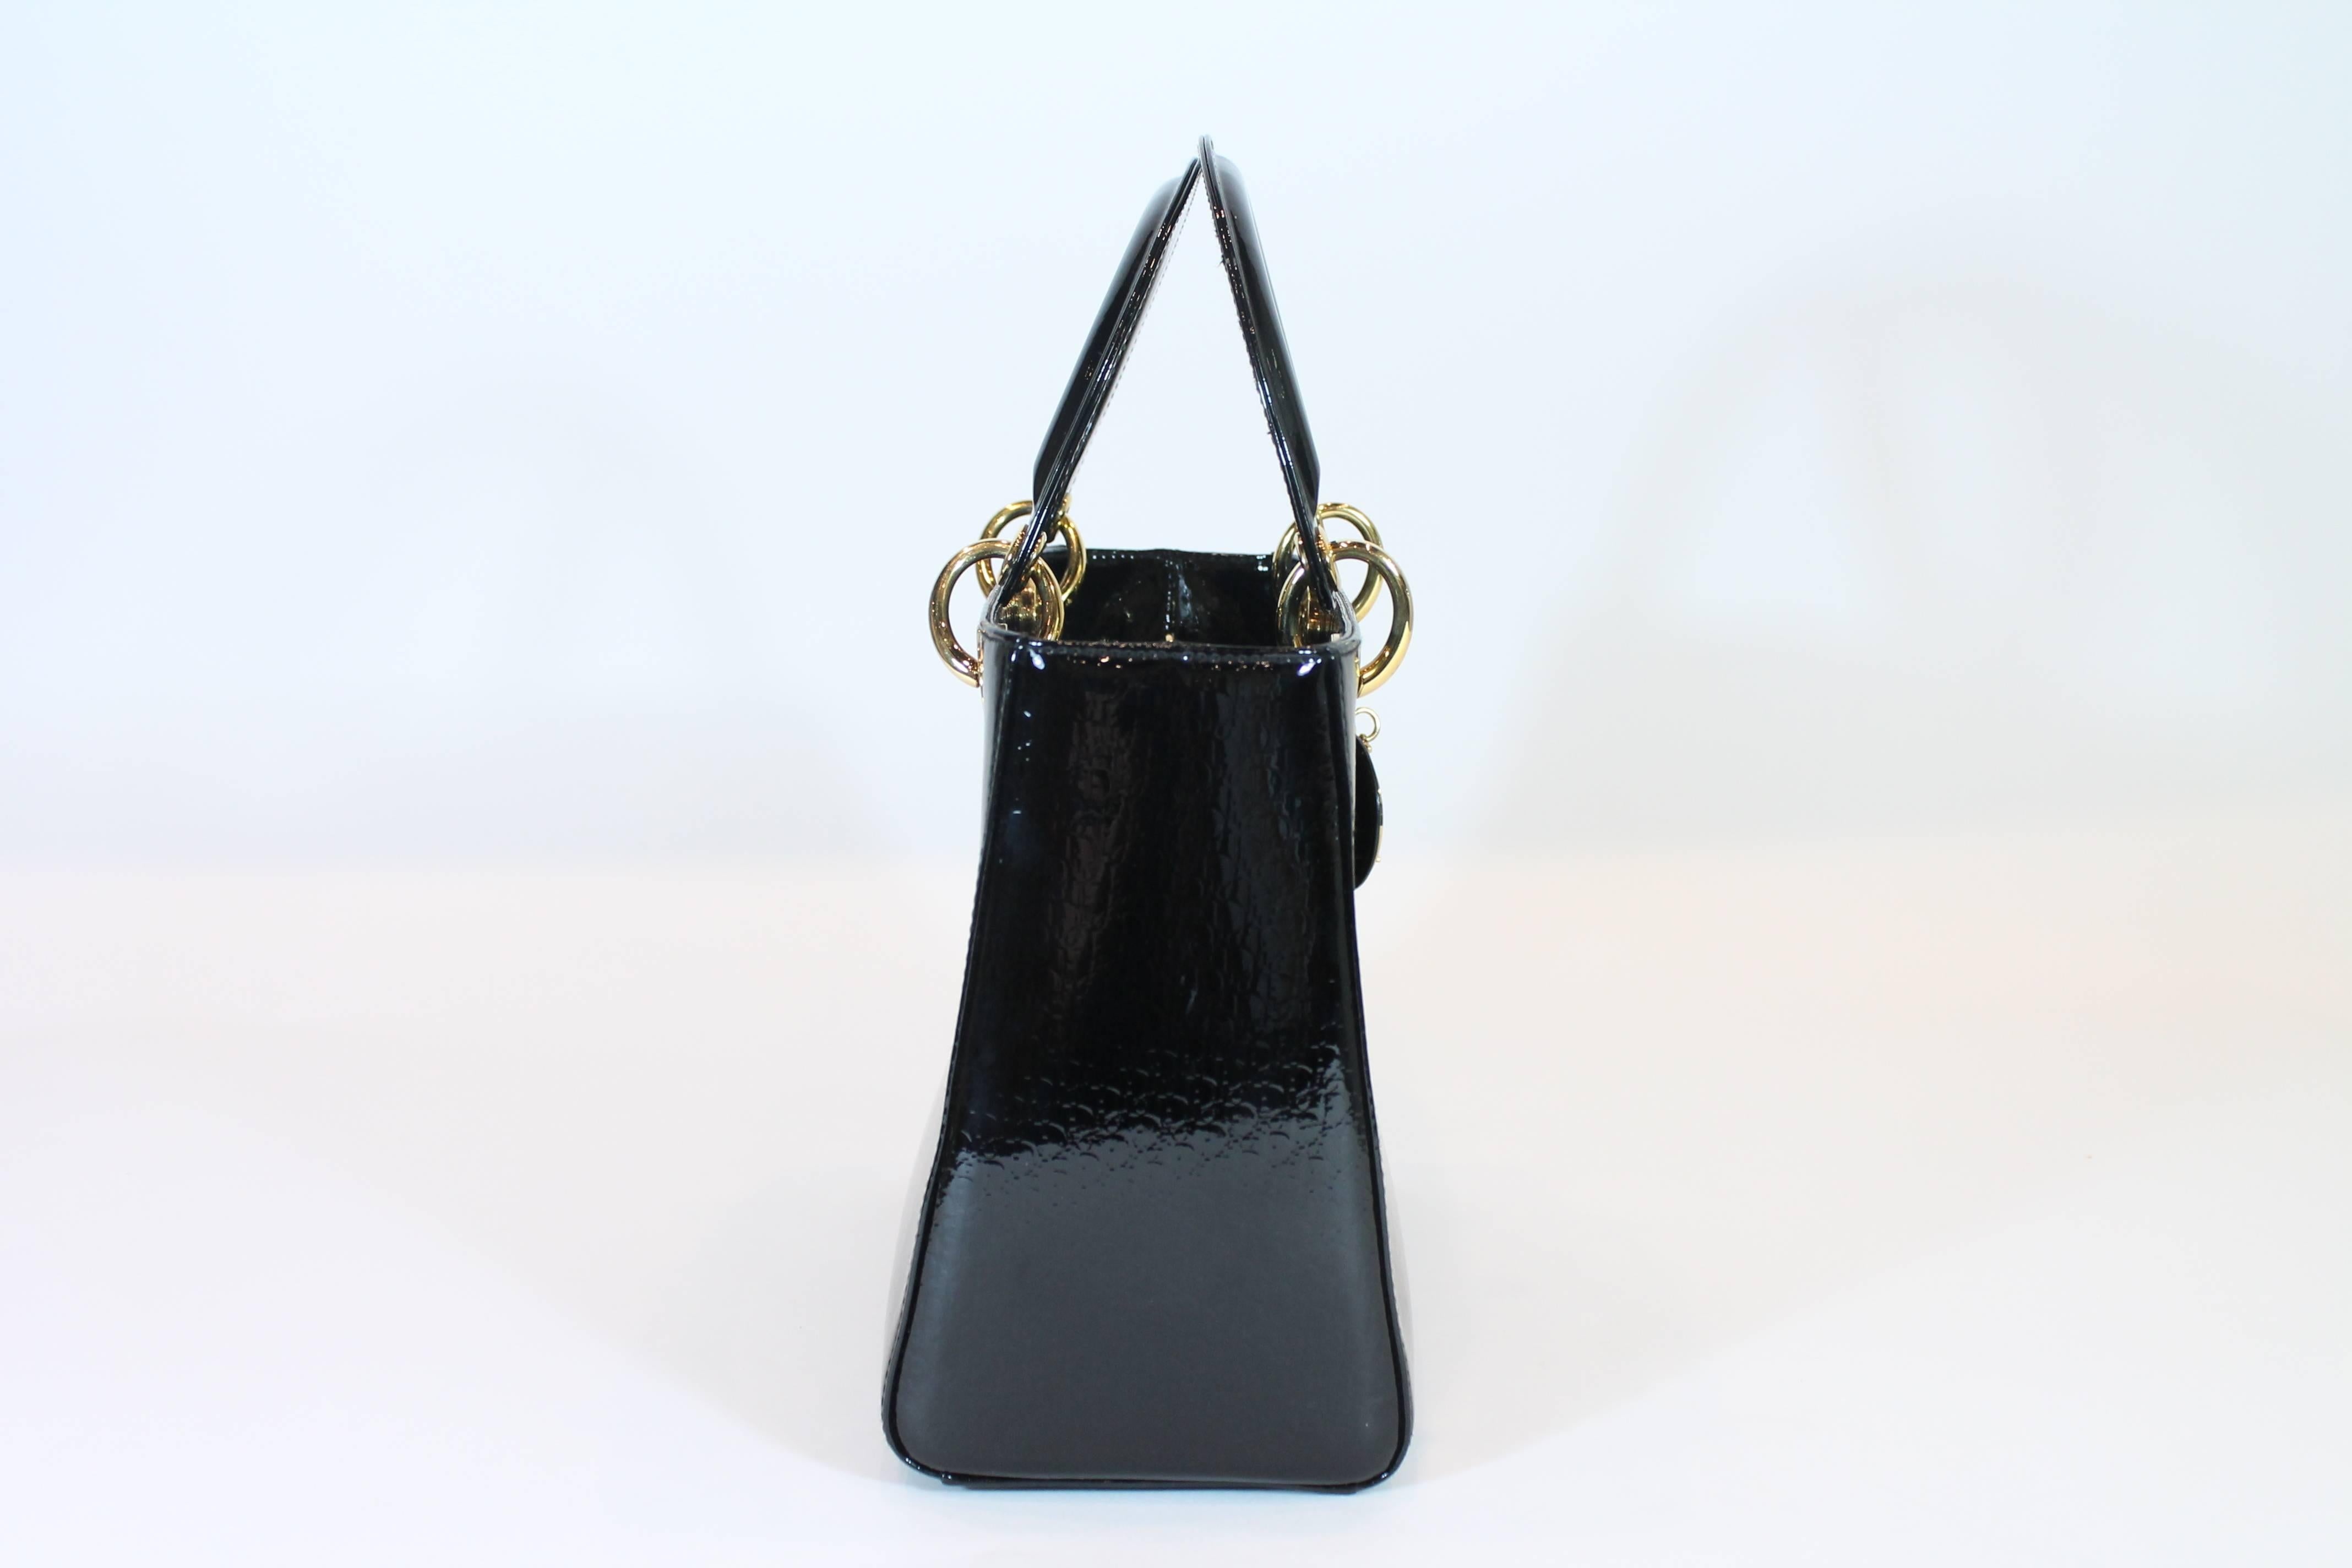 Black patent leather. Gold-tone hardware. Dual top handles. Zippered closure at top. One interior zippered pocket.